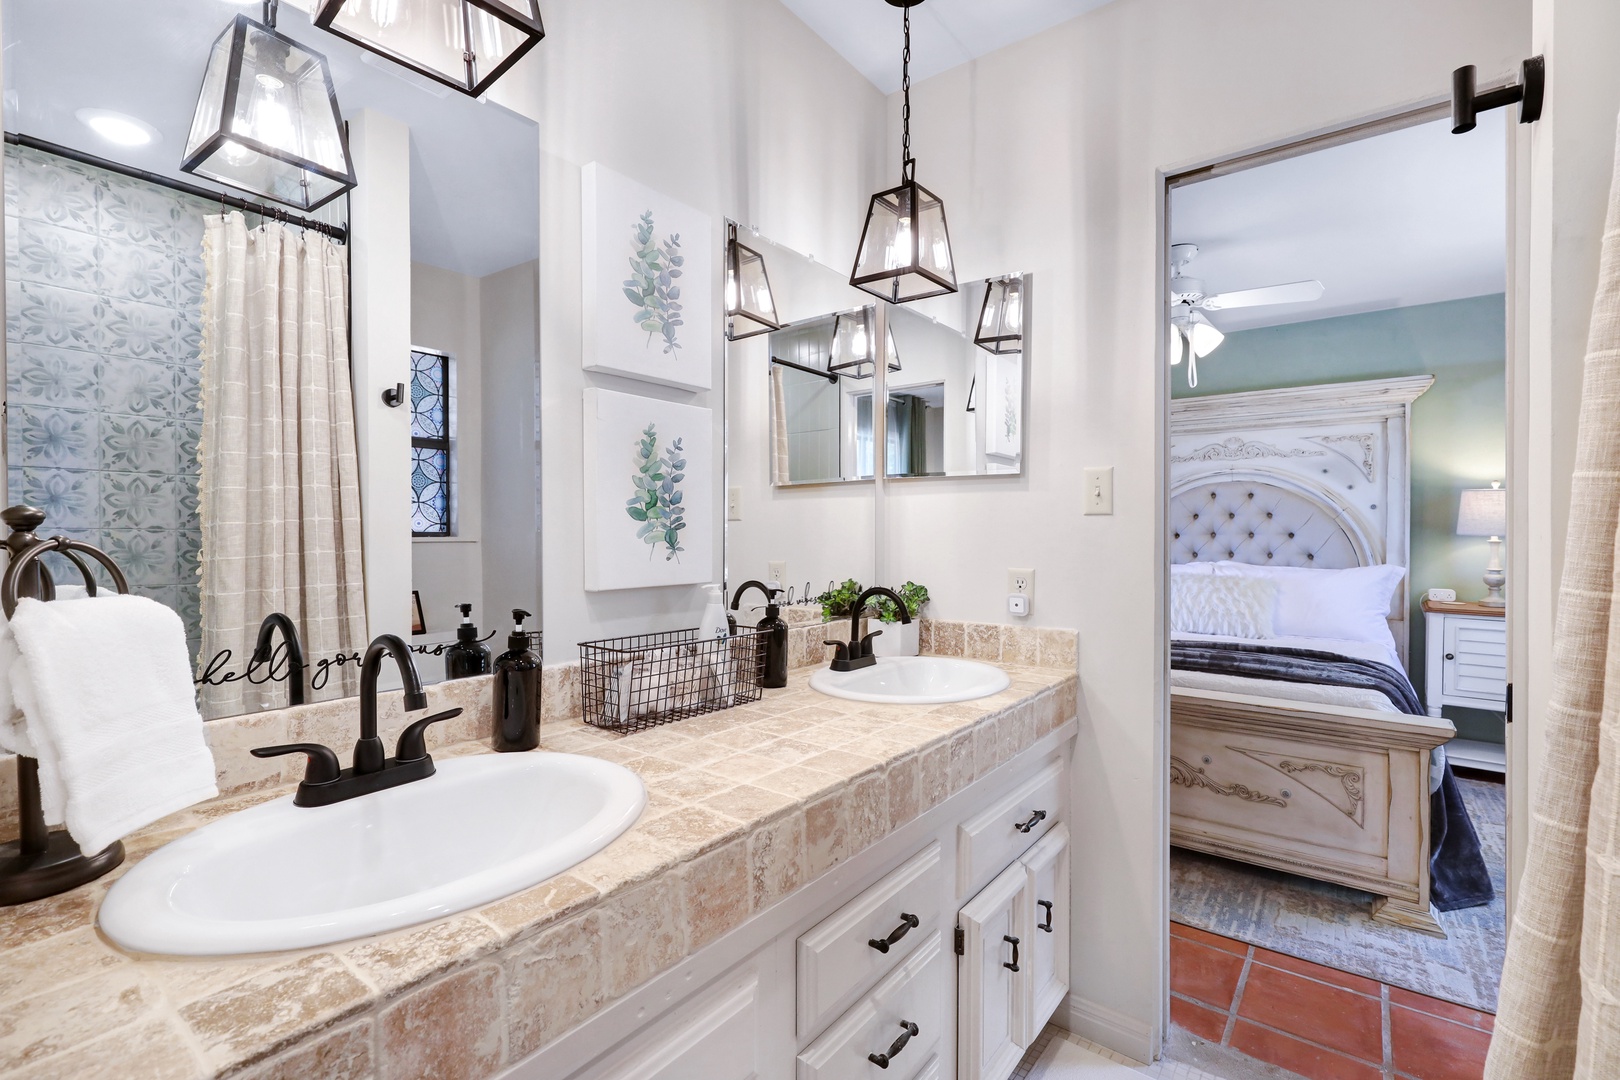 Dual vanities and a walk-in shower await in this Jack & Jill bath